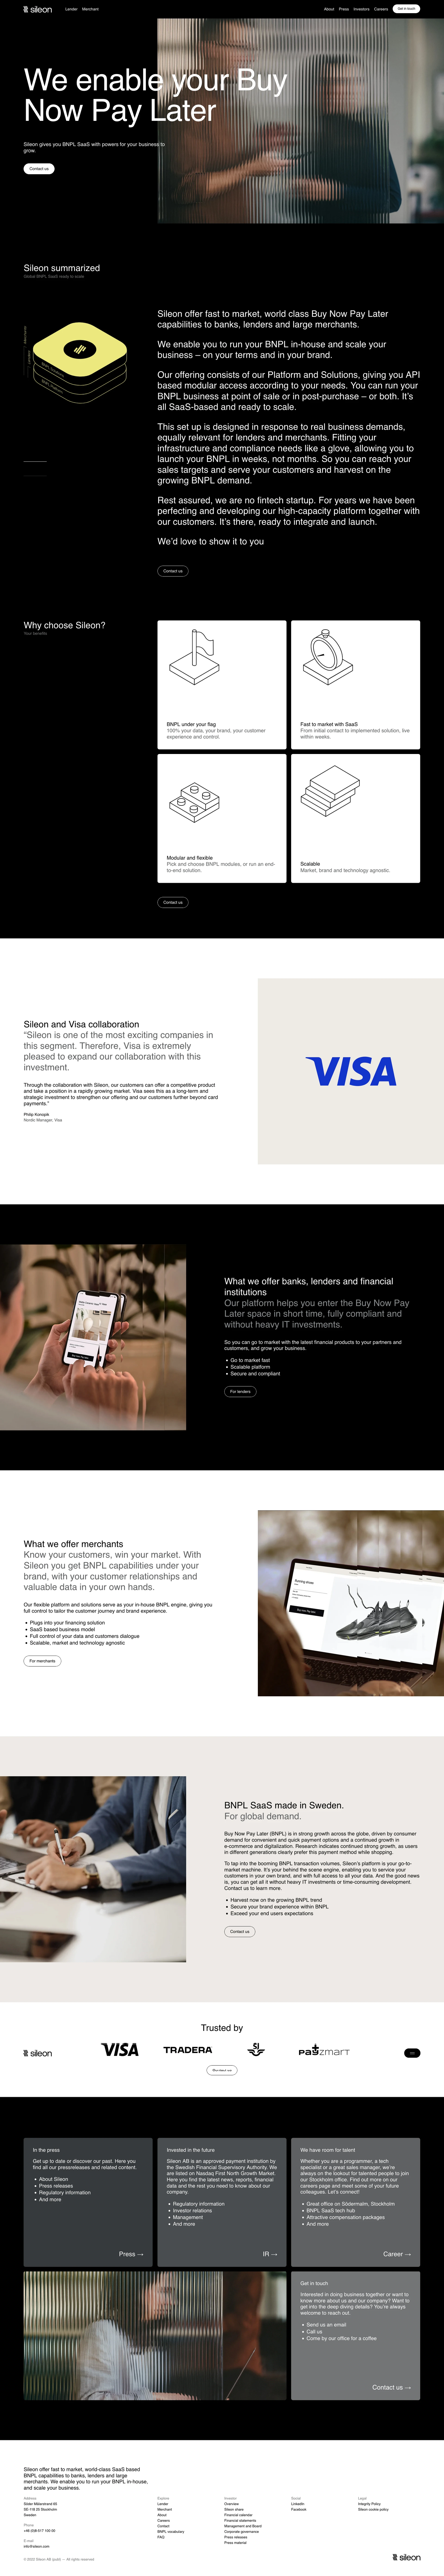 Sileon Landing Page Example: Buy Now Pay Later for banks, lenders and large merchants. We enable you to run your BNPL in-house and scale your business - on YOUR TERMS and in YOUR BRAND.